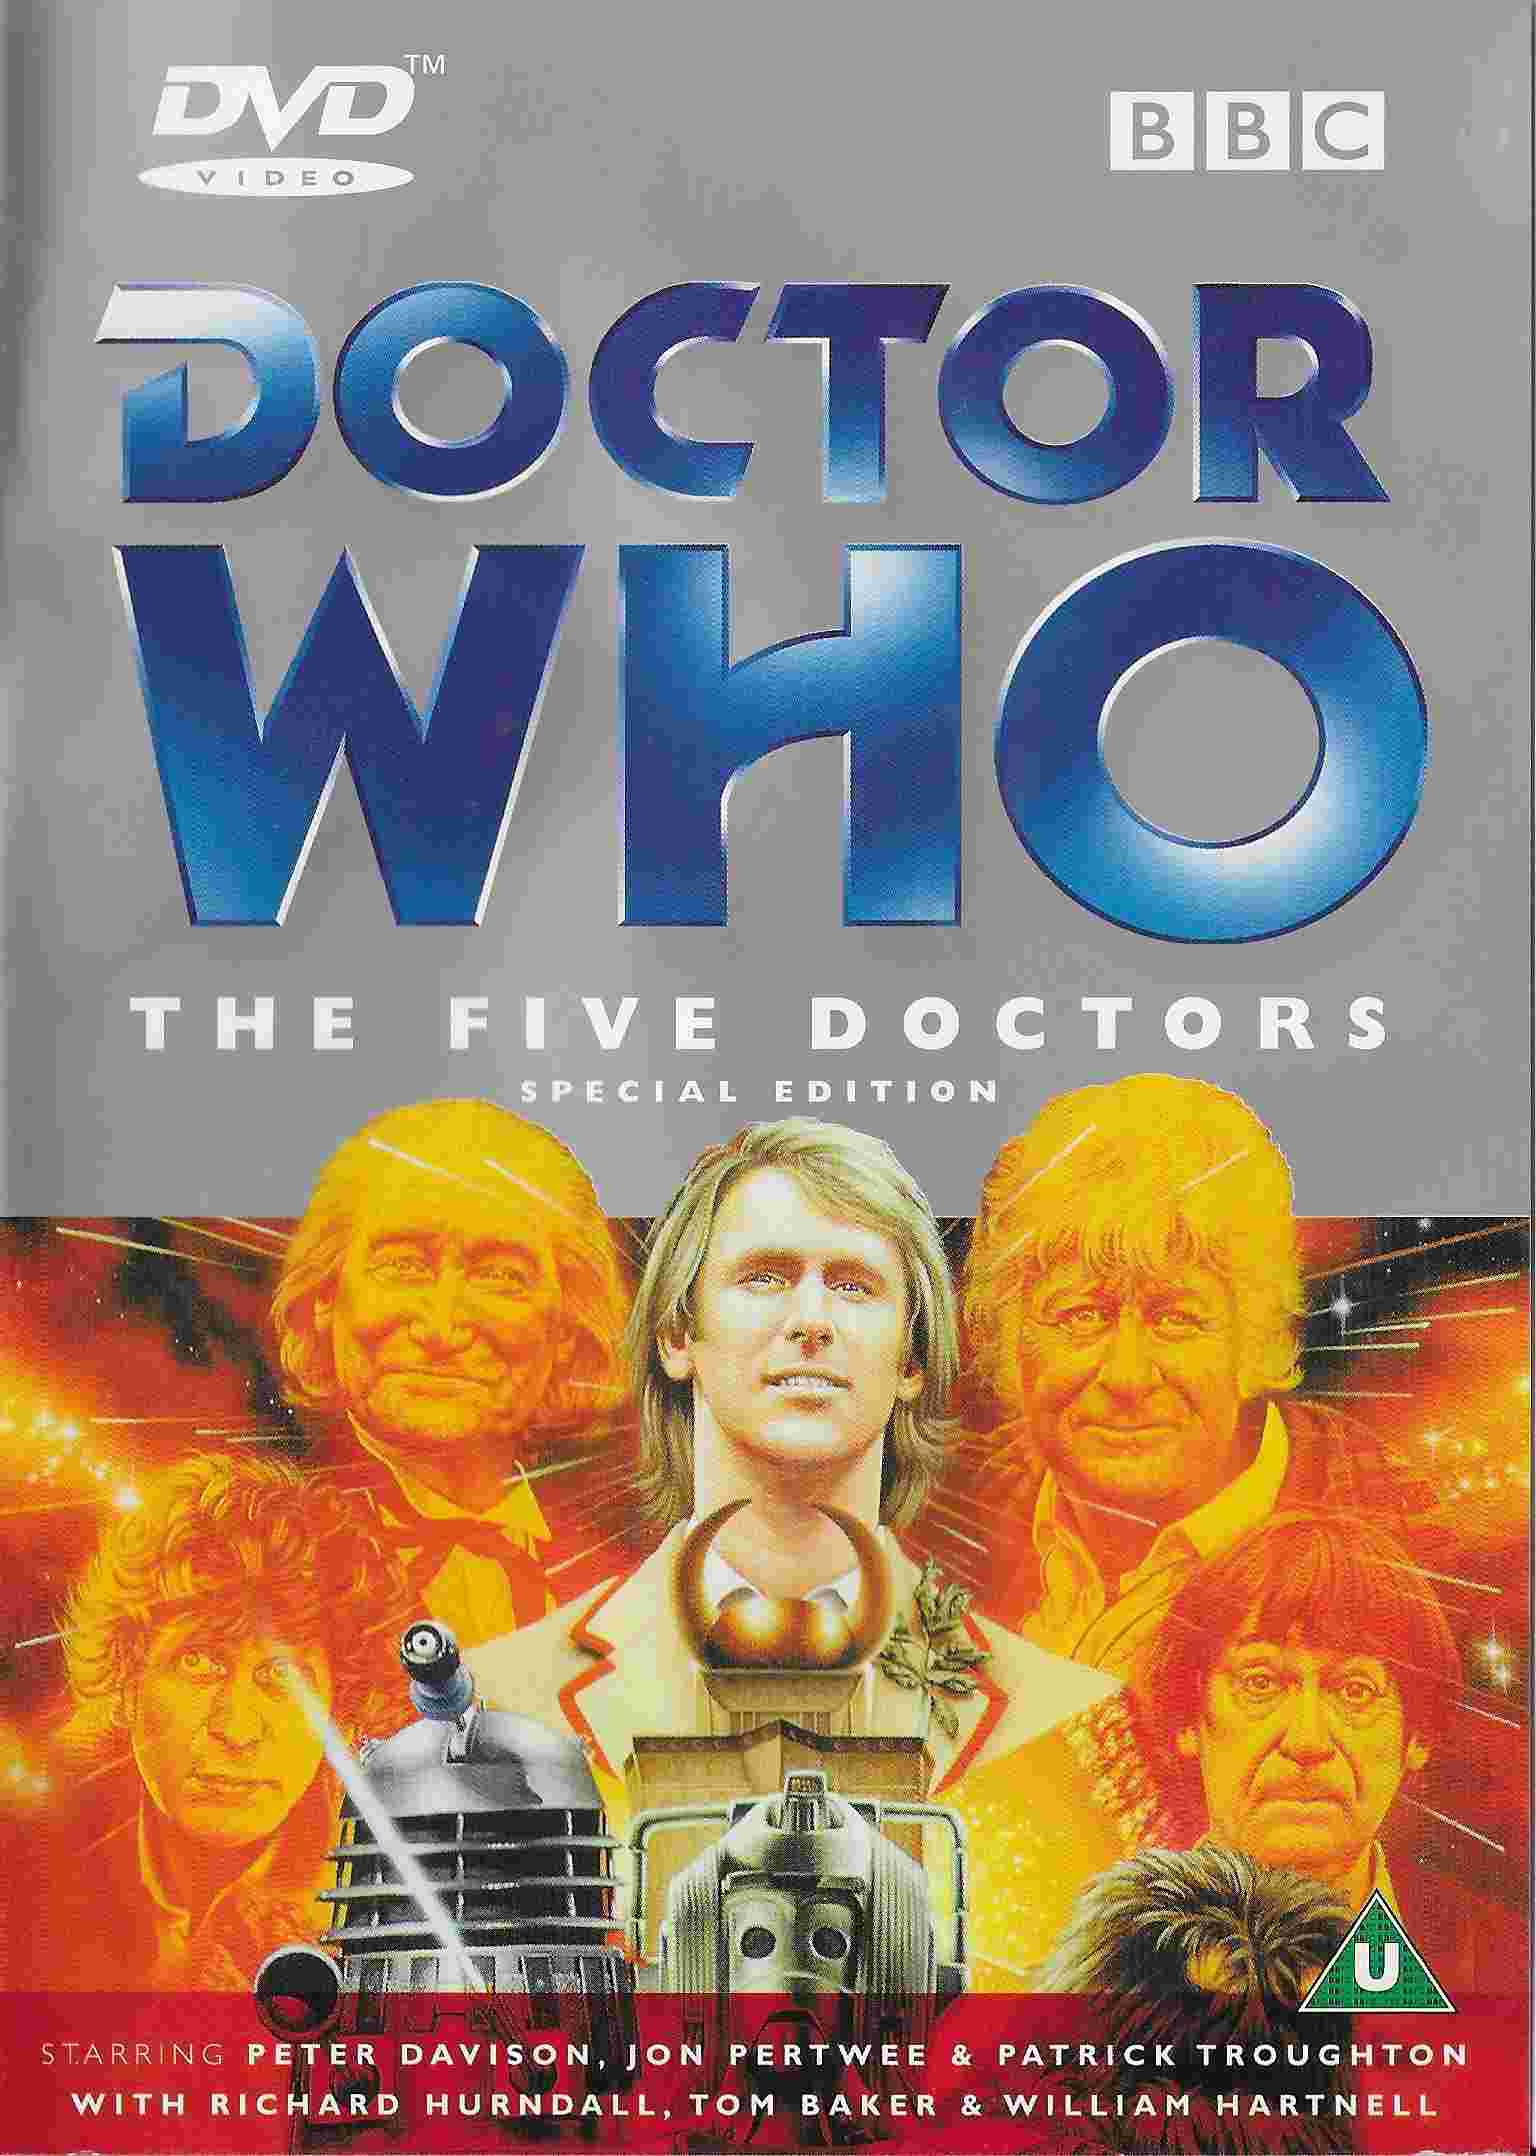 Picture of Doctor Who - The five Doctors by artist Terrance Dicks from the BBC dvds - Records and Tapes library